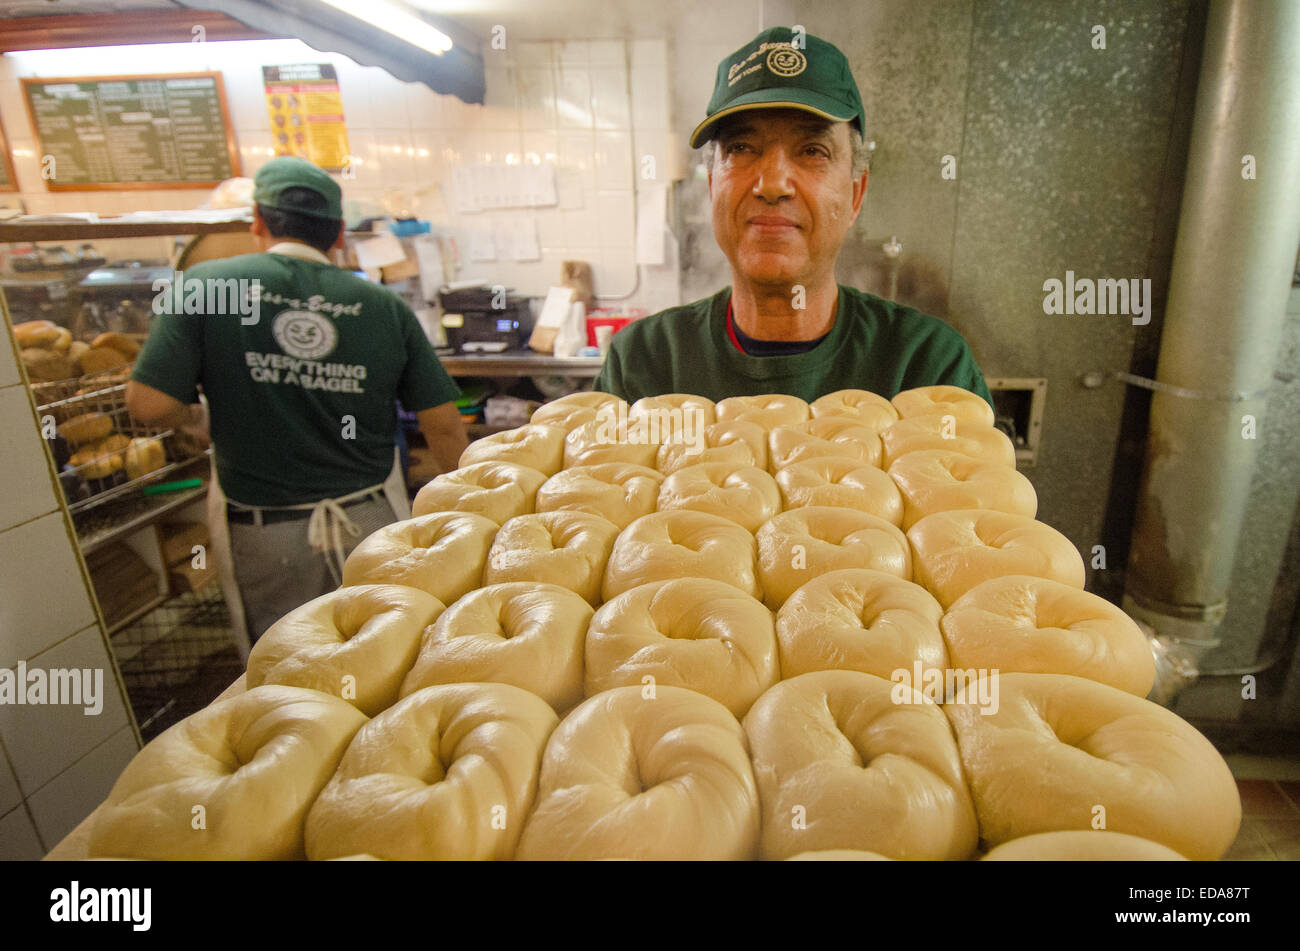 Kettle-boiled bagels are transported to the oven for its final stage of preparation at New York City's Ess-a-Bagel. Stock Photo